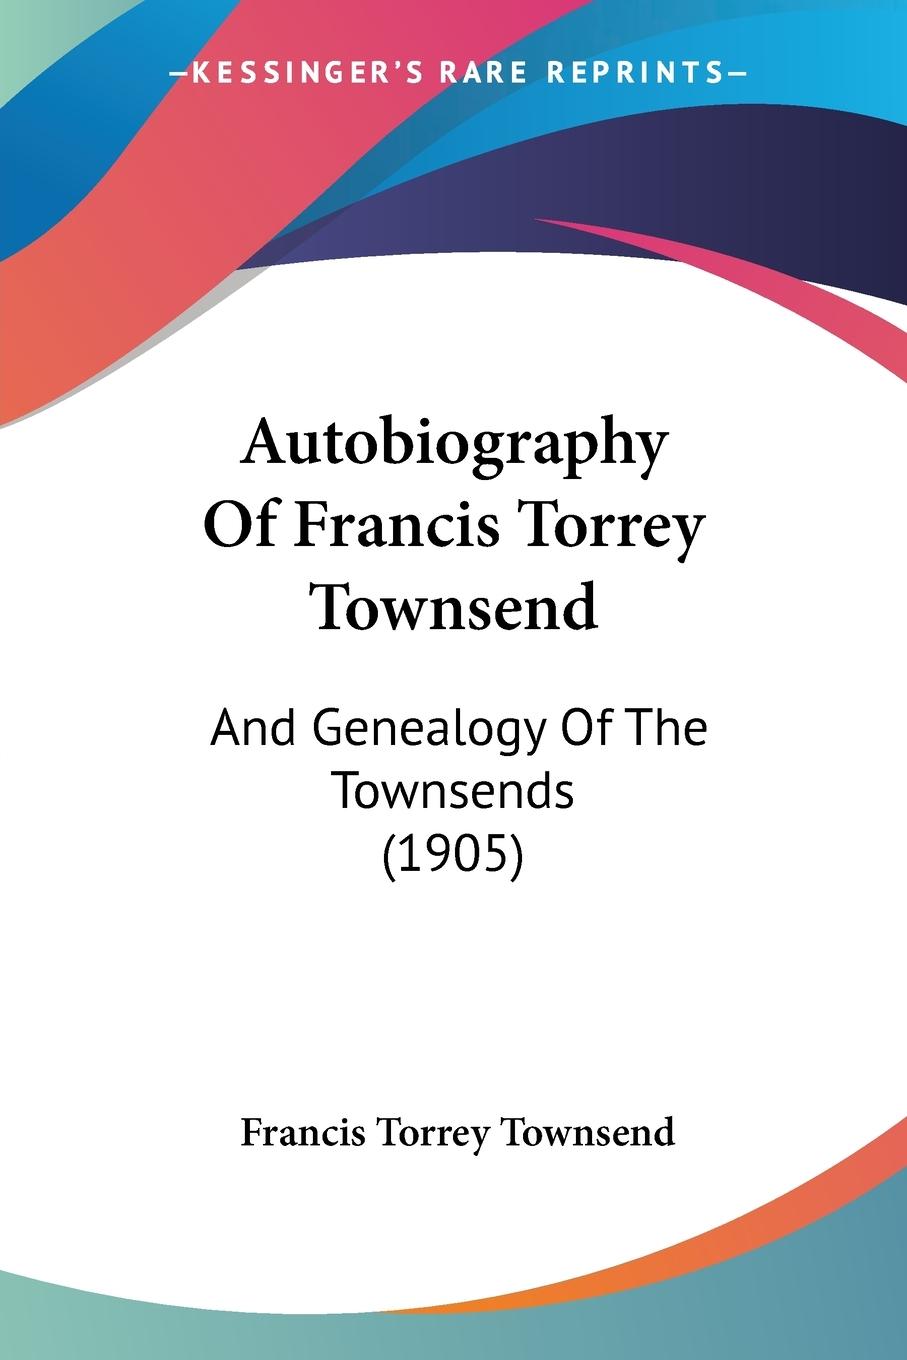 Autobiography Of Francis Torrey Townsend - Townsend, Francis Torrey